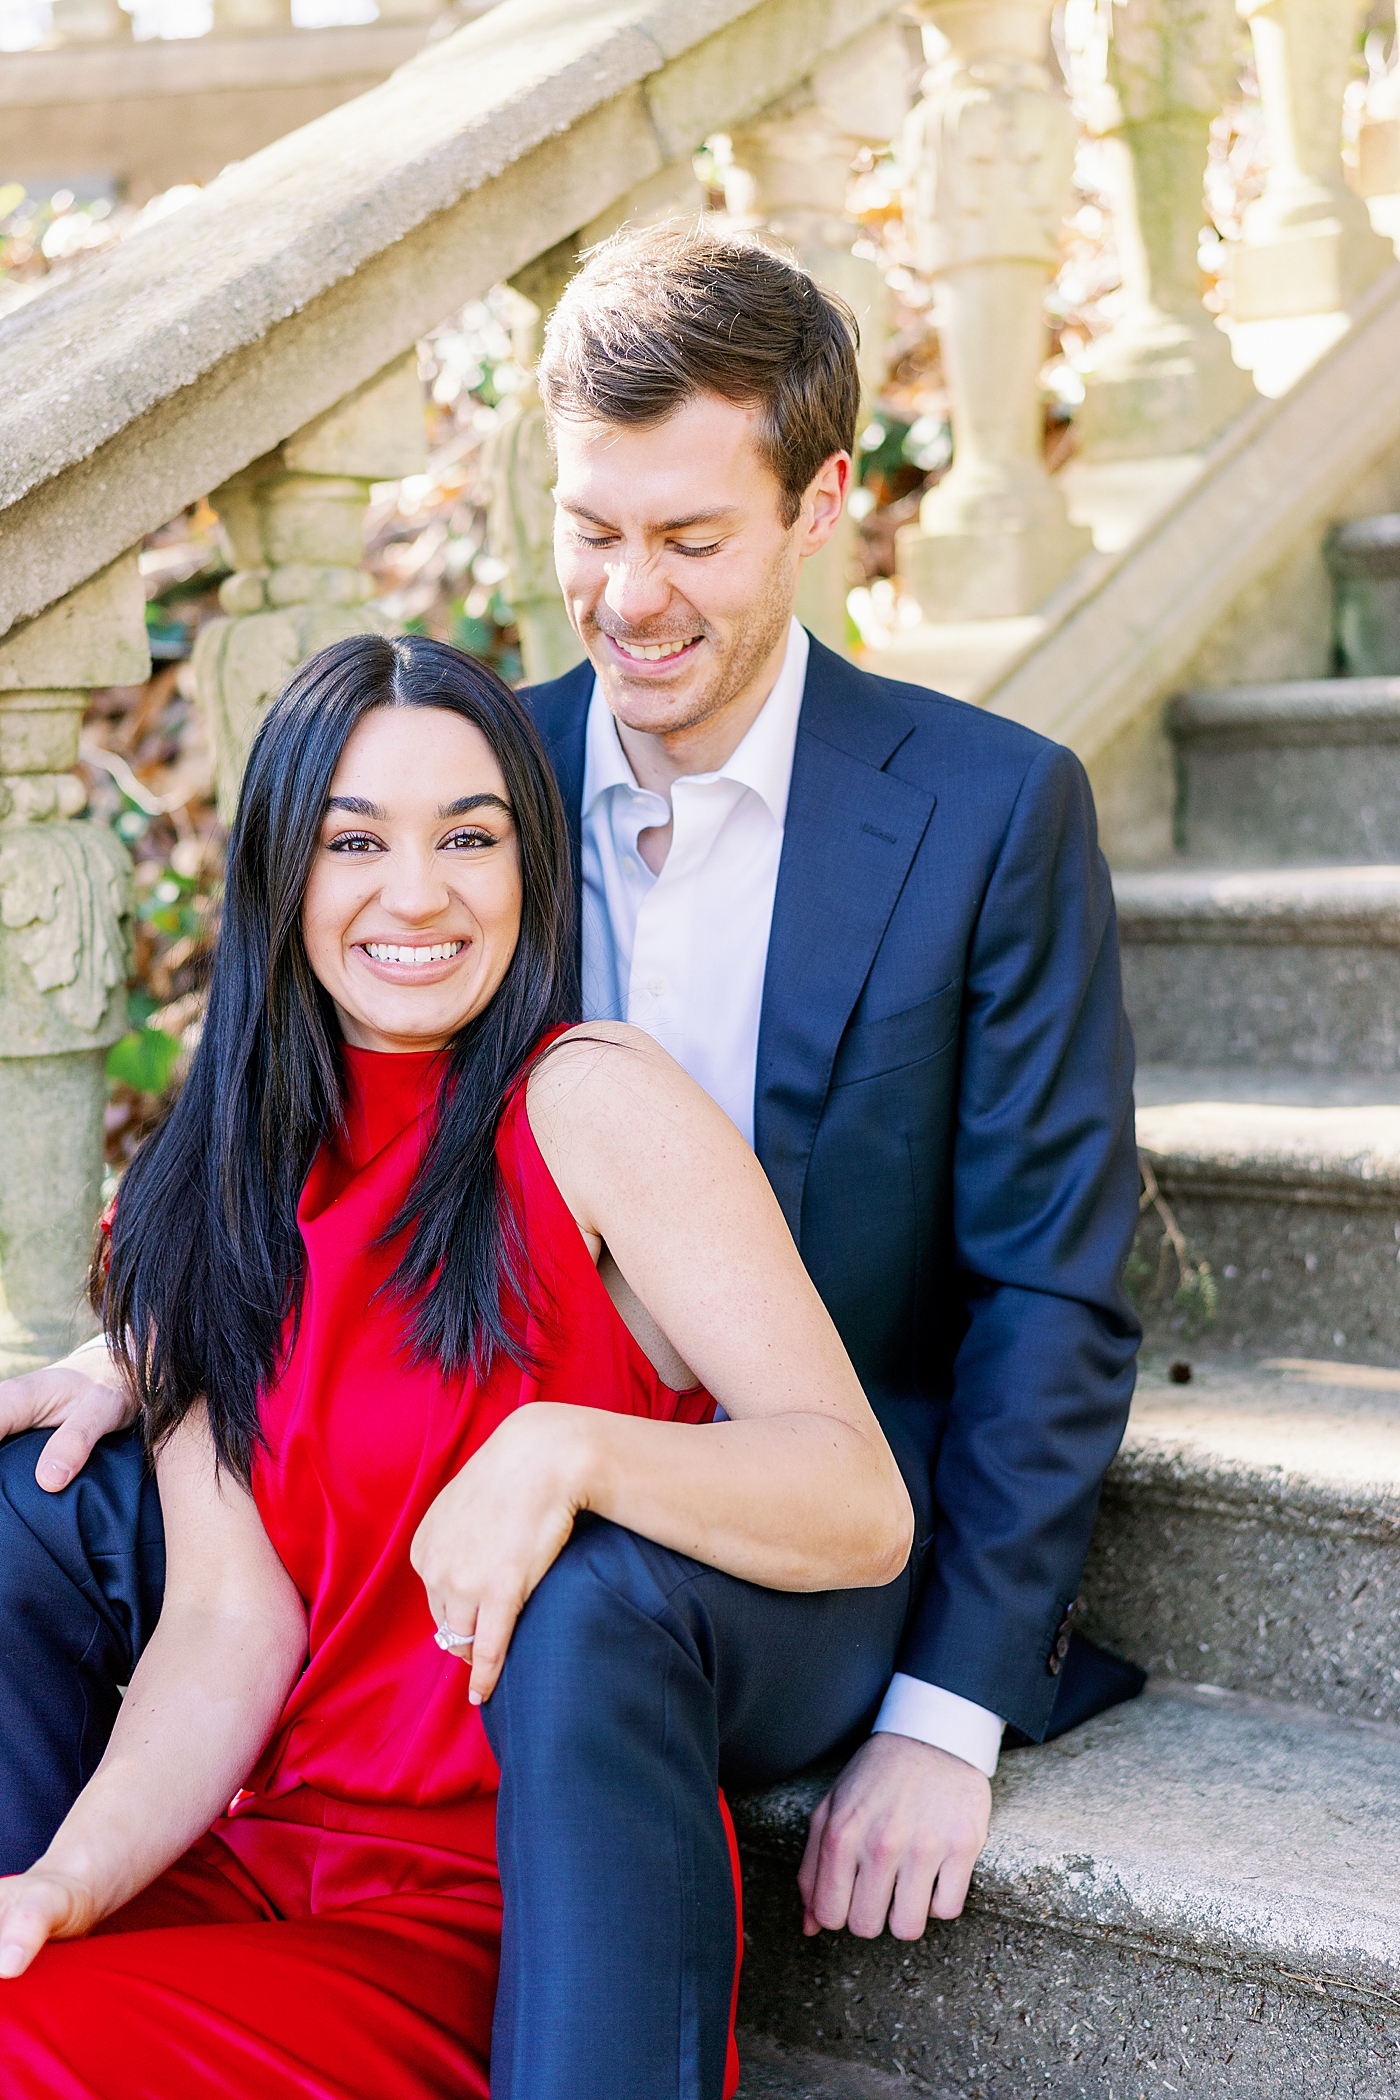 Smiling couple sitting on a stone staircase | Image by Annie Laura Photo